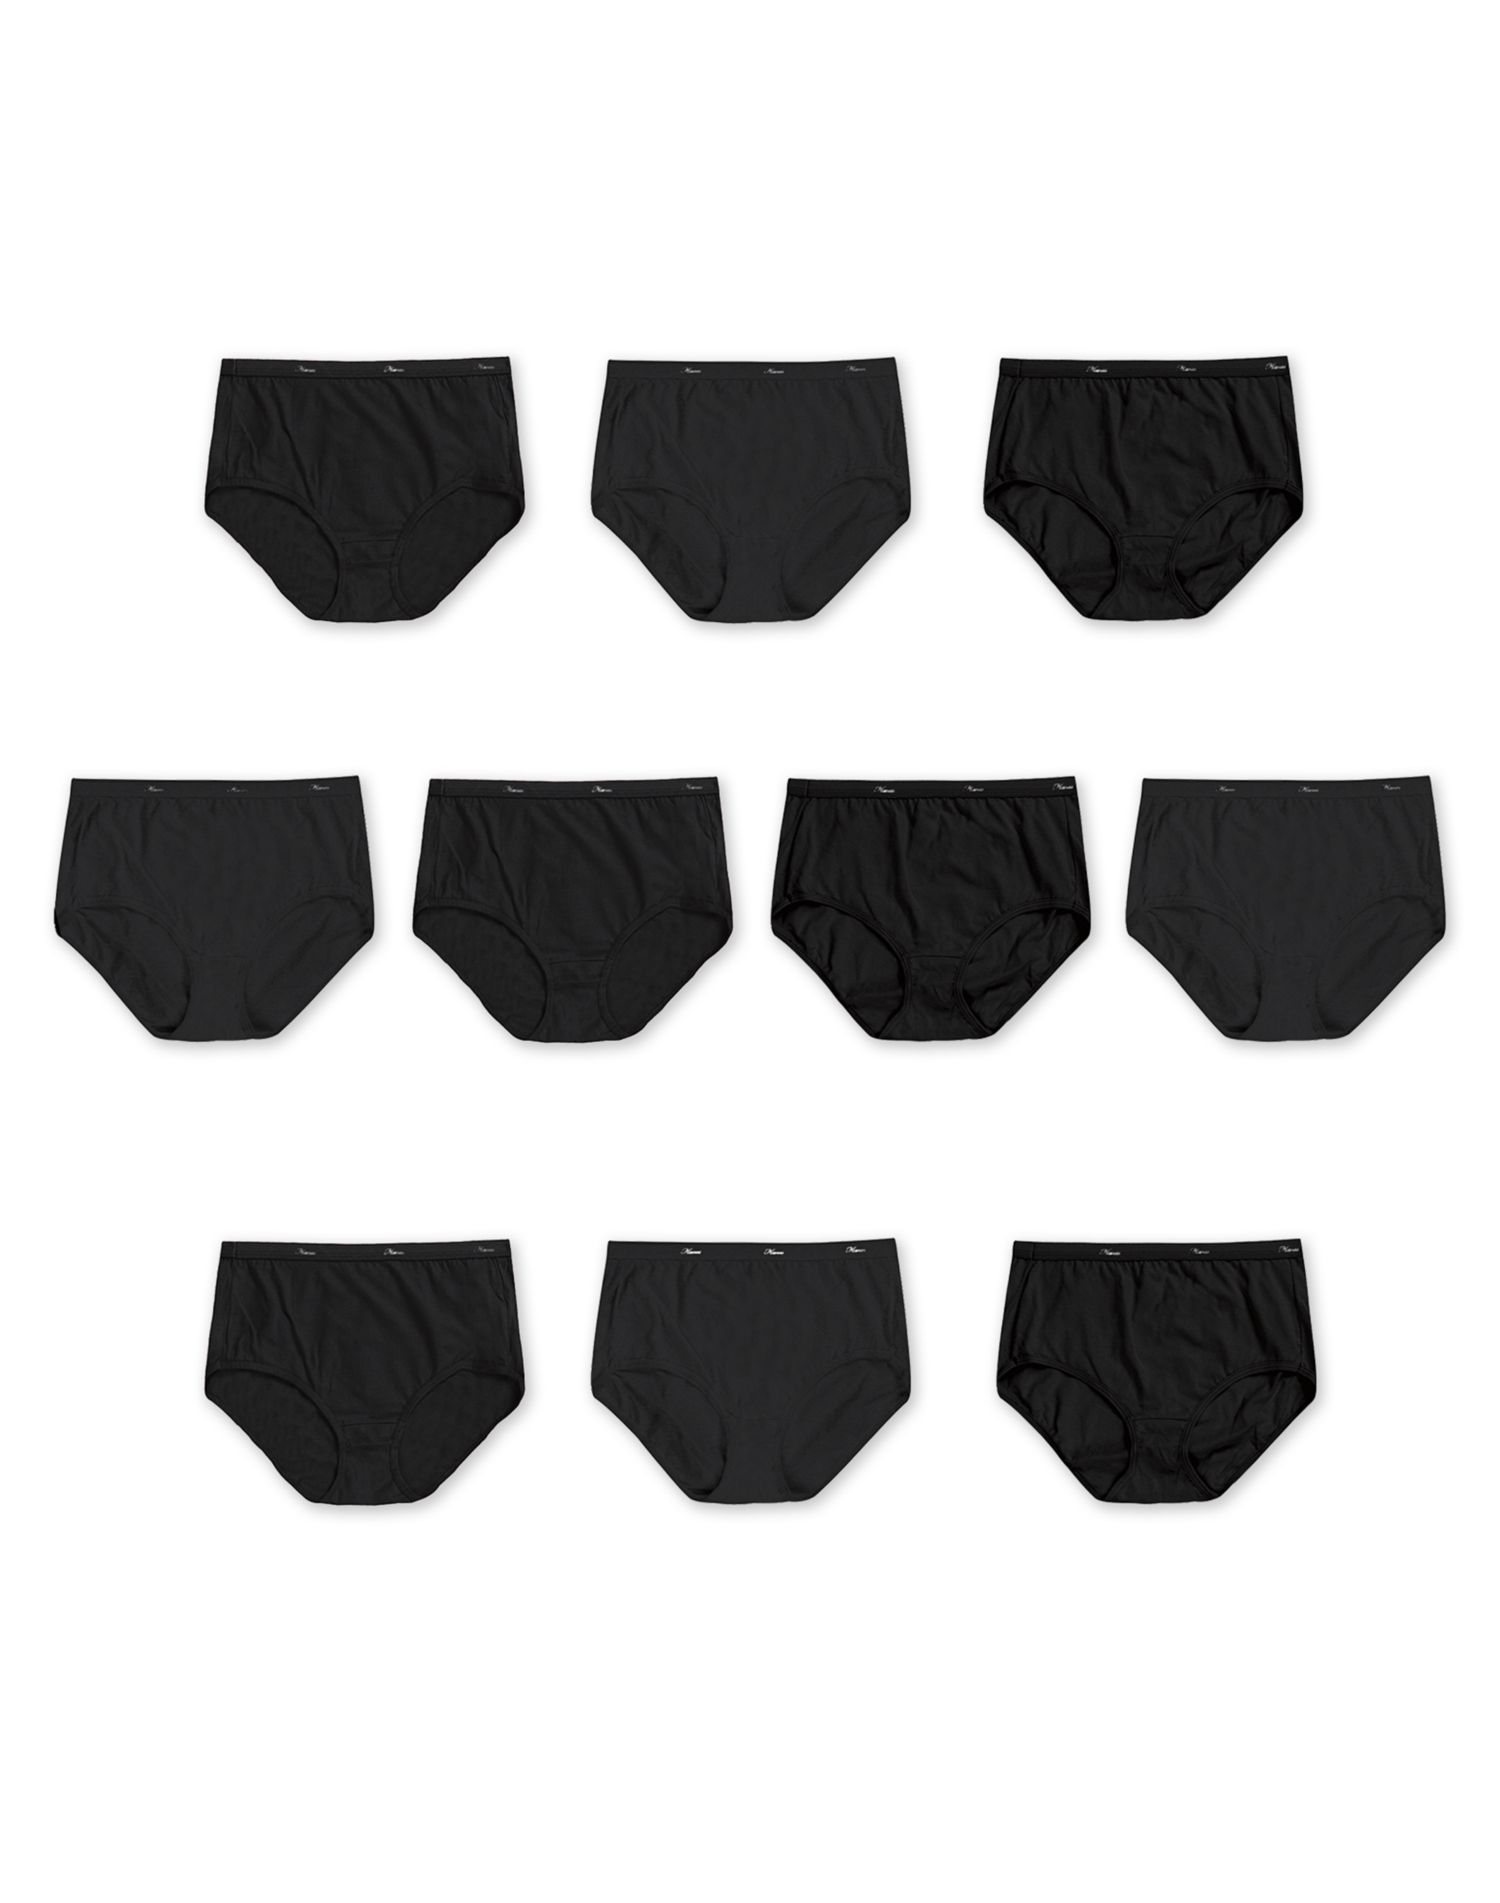 Hanes Womens Breathable Cotton All Black Briefs 10-Pack - Apparel